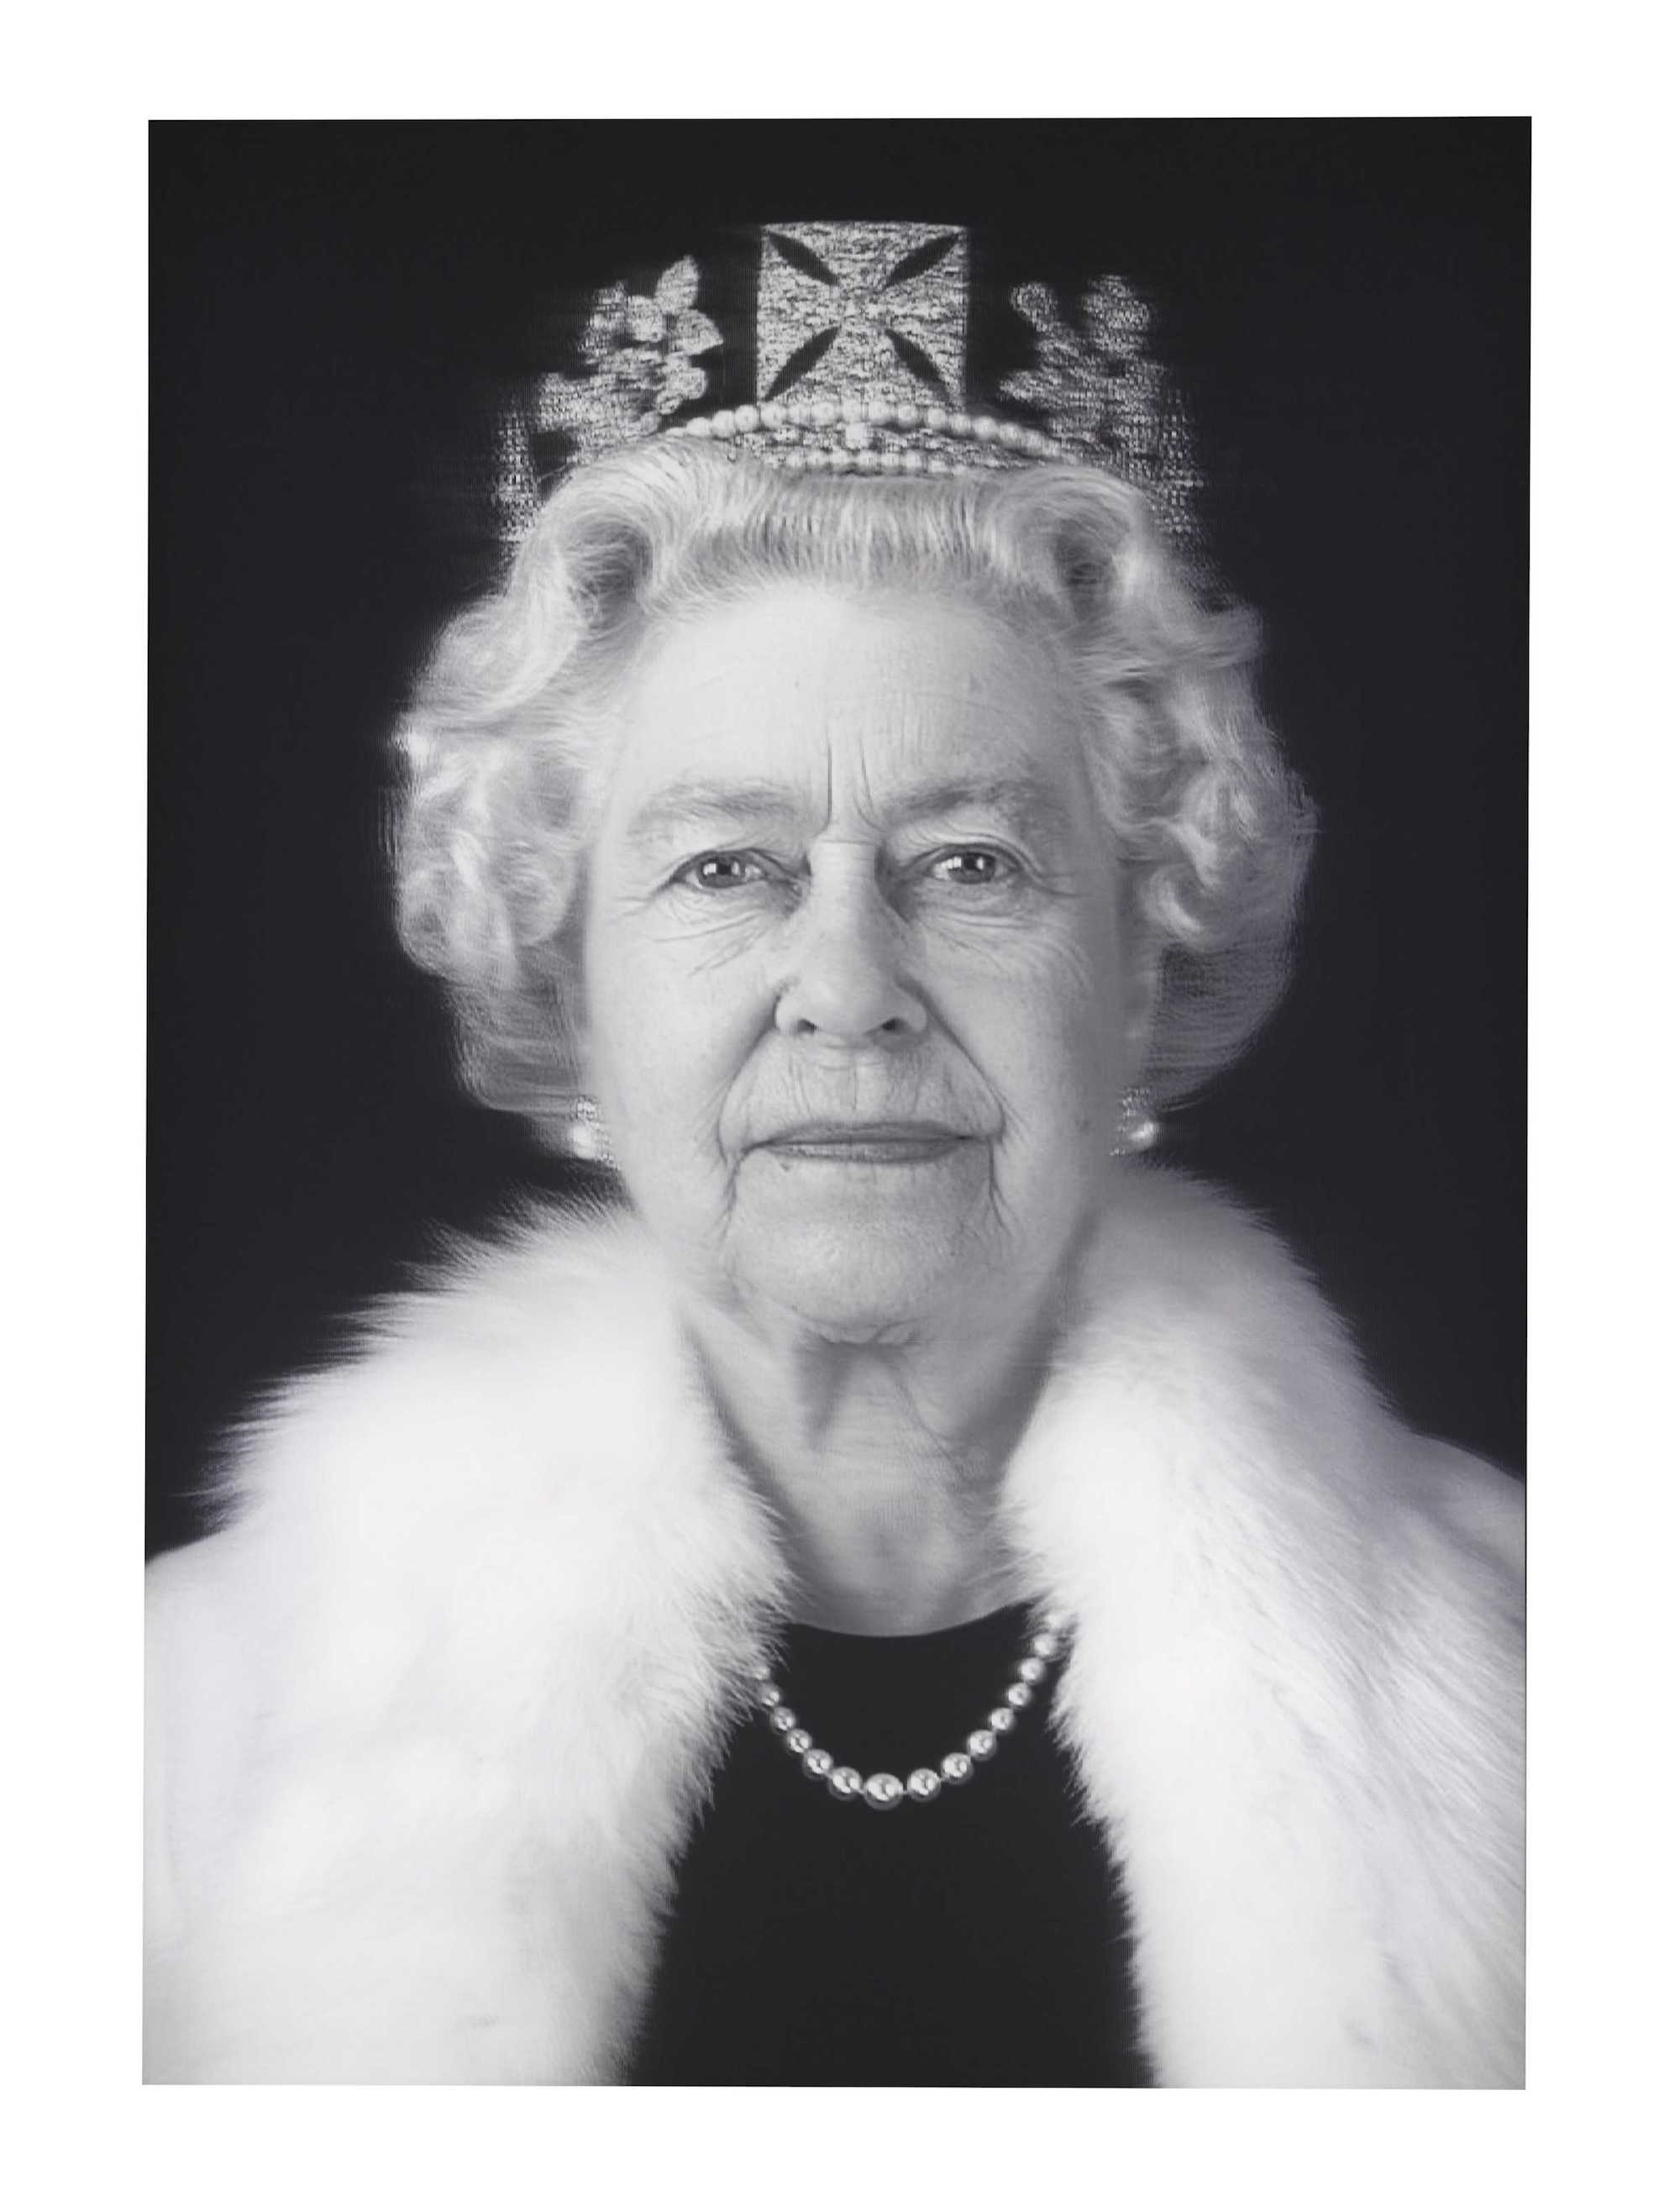 GOD SAVE THE QUEEN!